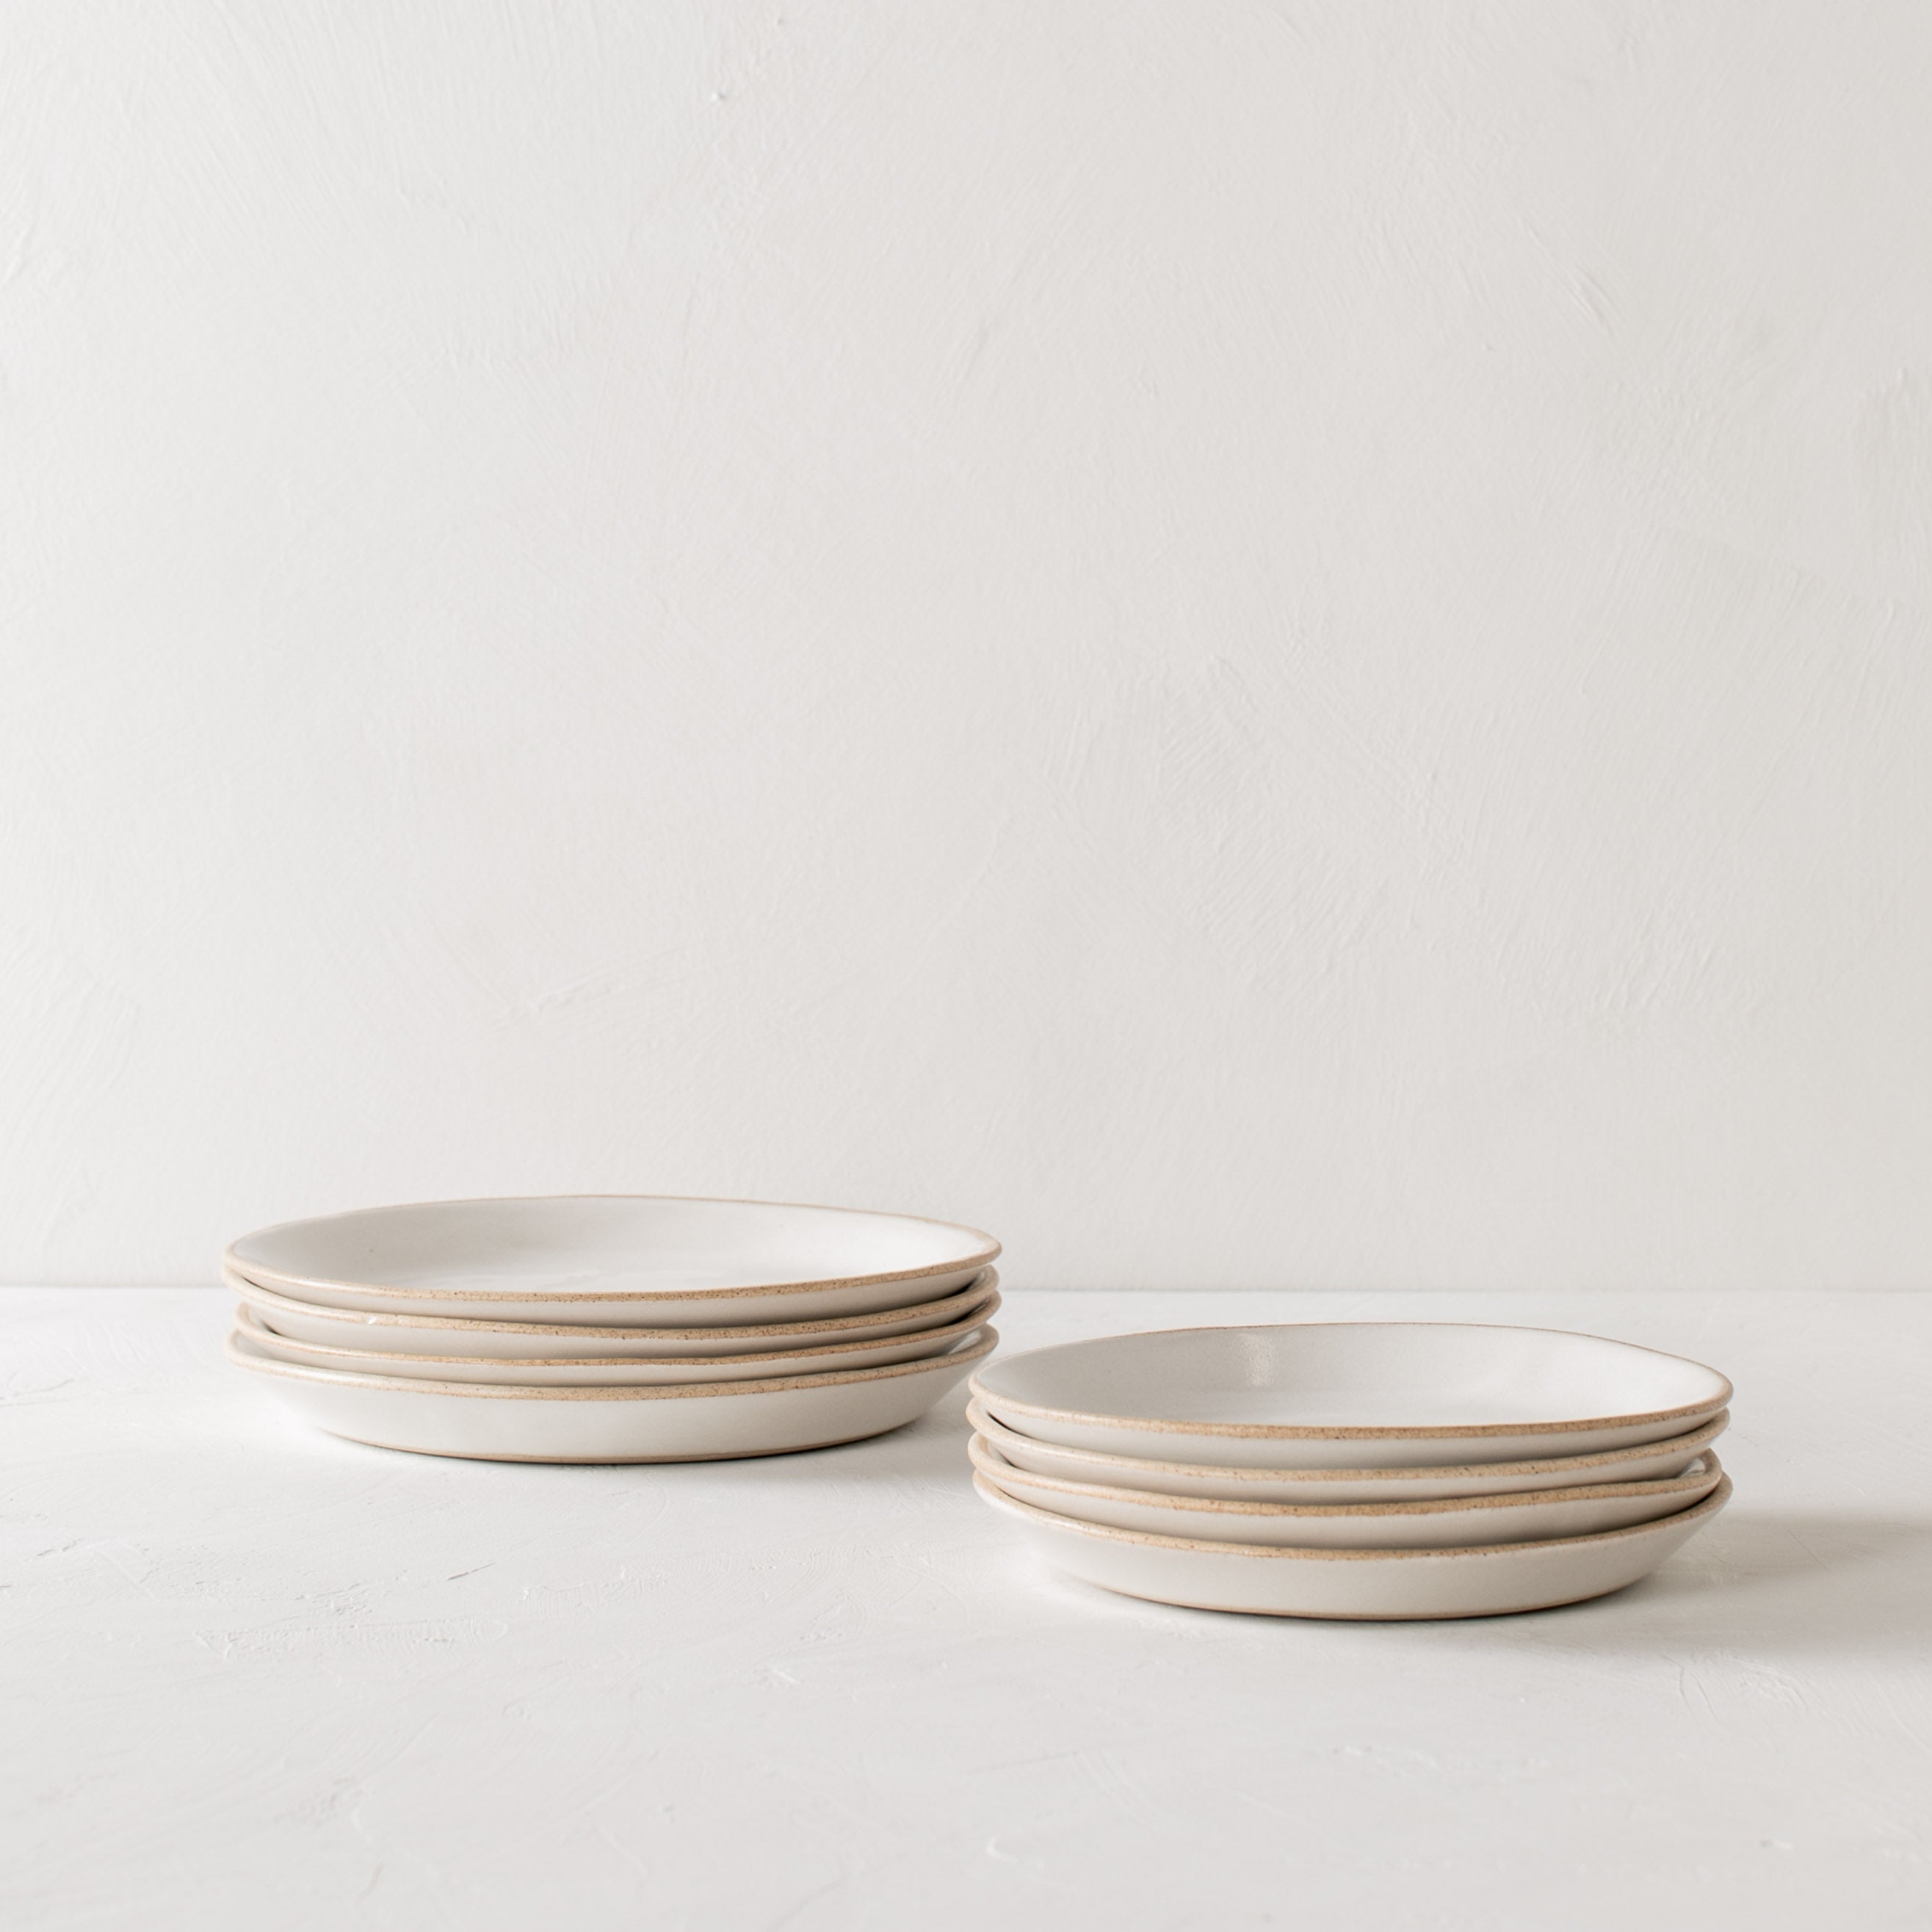 Minimal white ceramic plates stacked, four salad plates stacked beside four dinner plates. Handmade ceramic plates, designed and sold by Convivial Production, Kansas City ceramics.